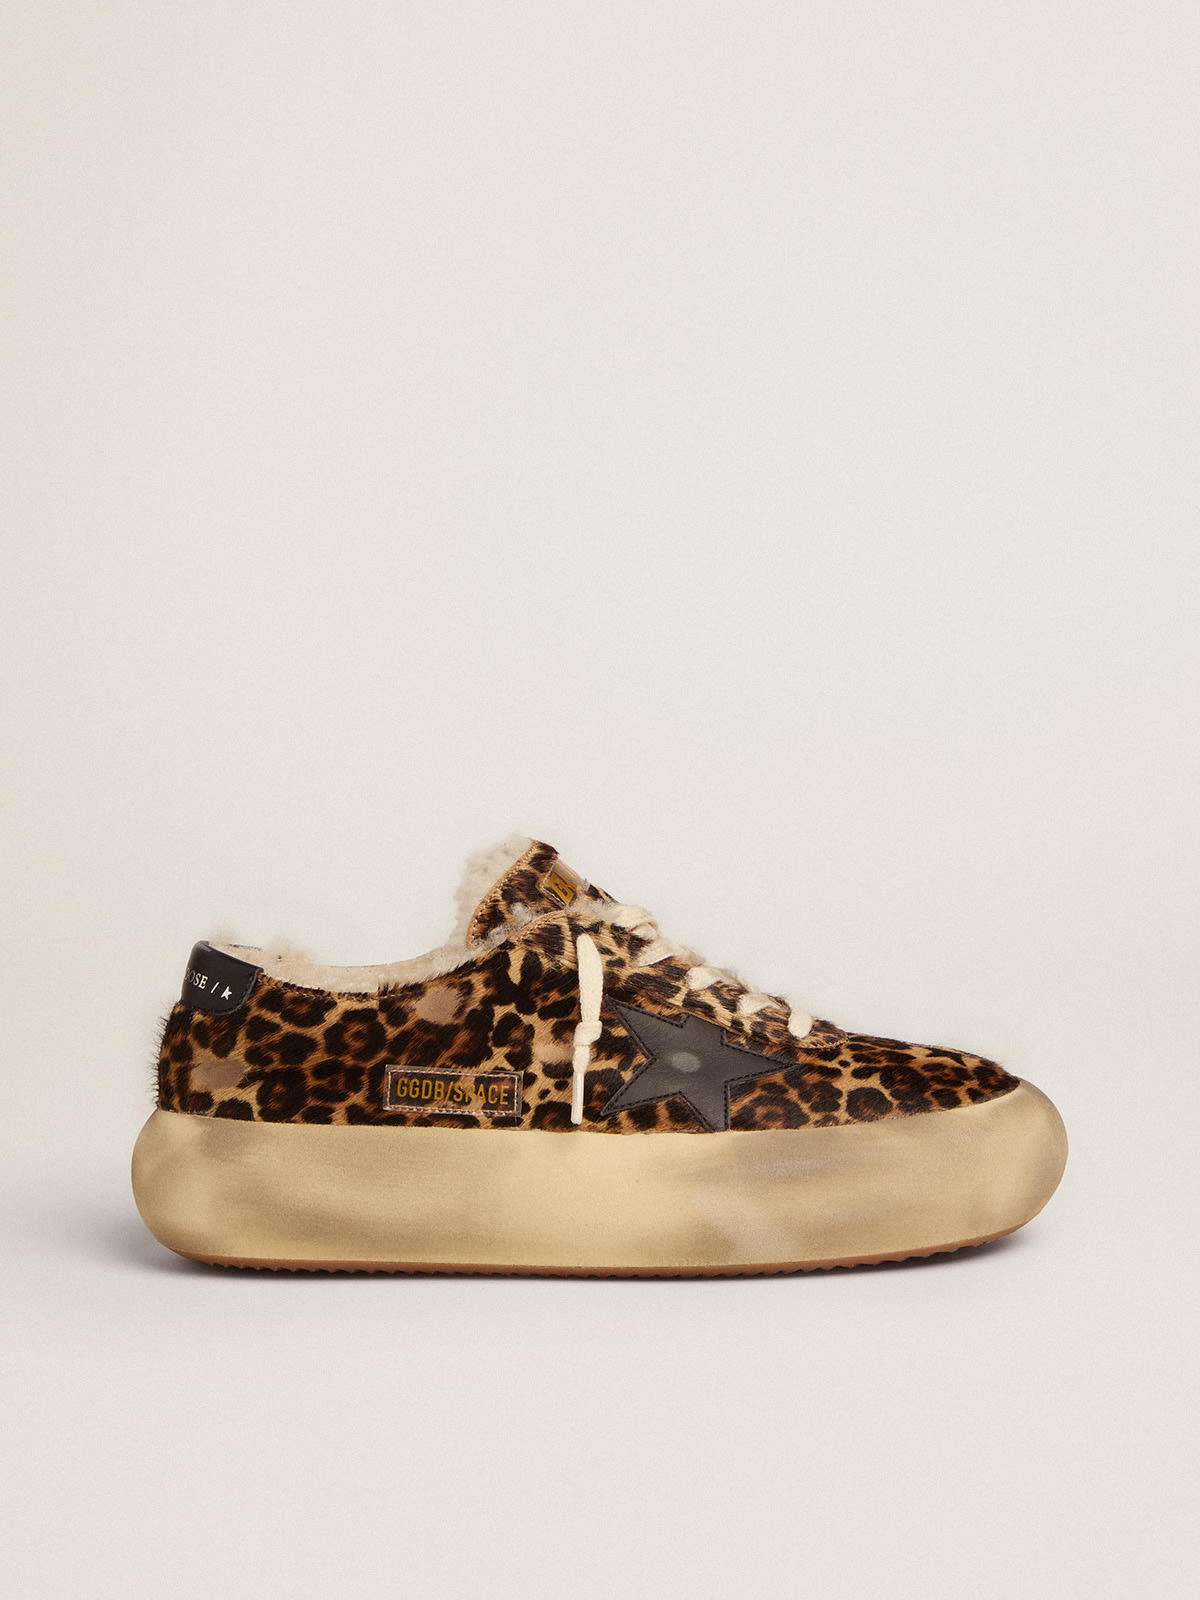 Golden Goose - Men's Space-Star shoes in animal-print pony skin with shearling lining in 